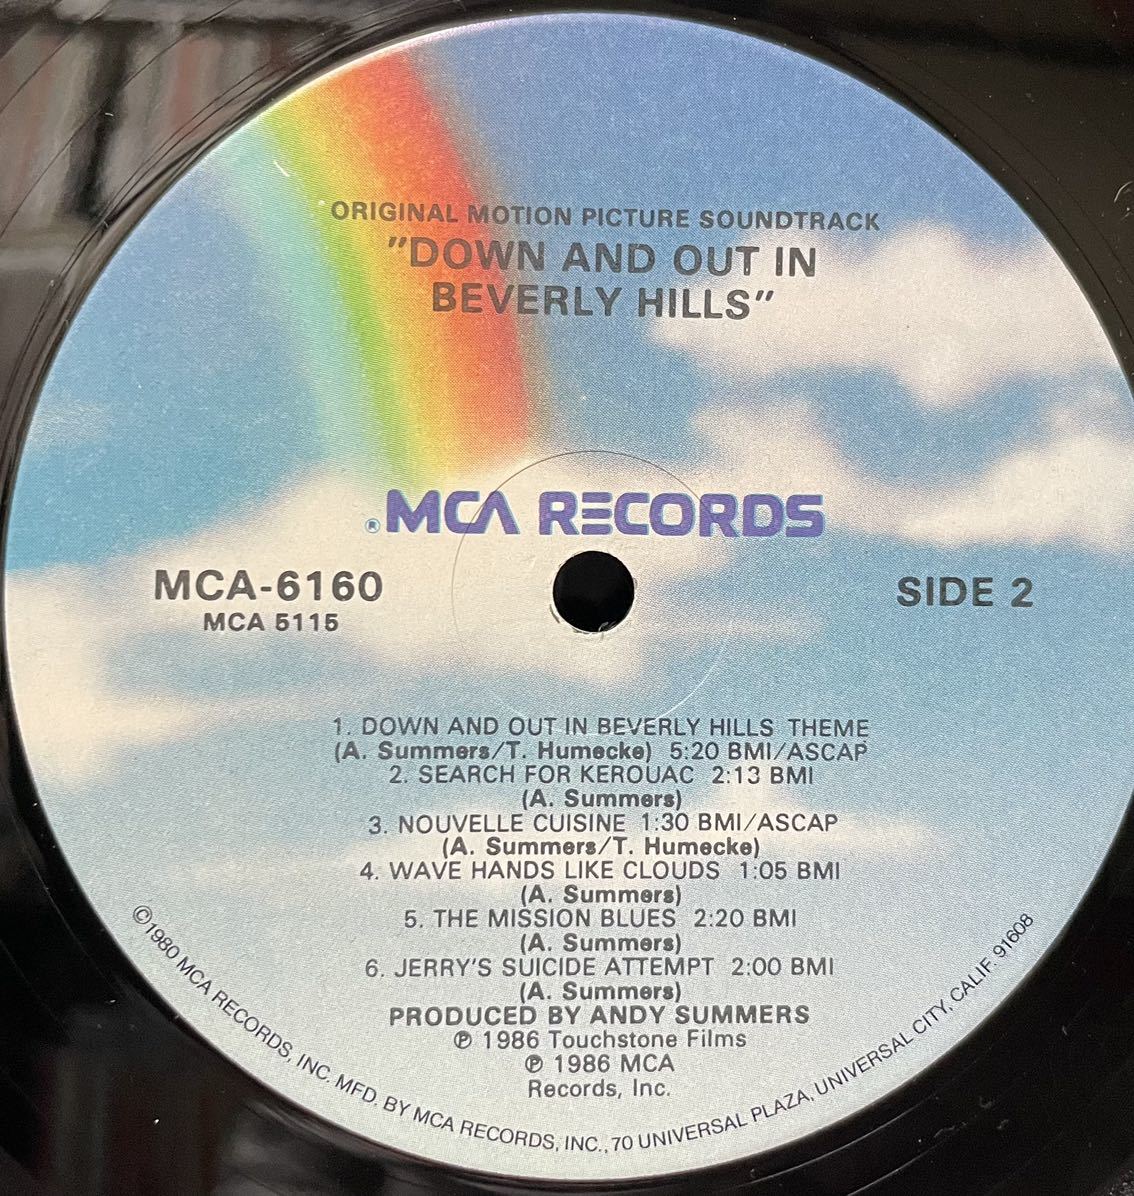  movie Down And Out In Beverly Hills (Original Motion Picture Soundtrack) 12inch size in addition, Pro motion record rare record great number exhibition.